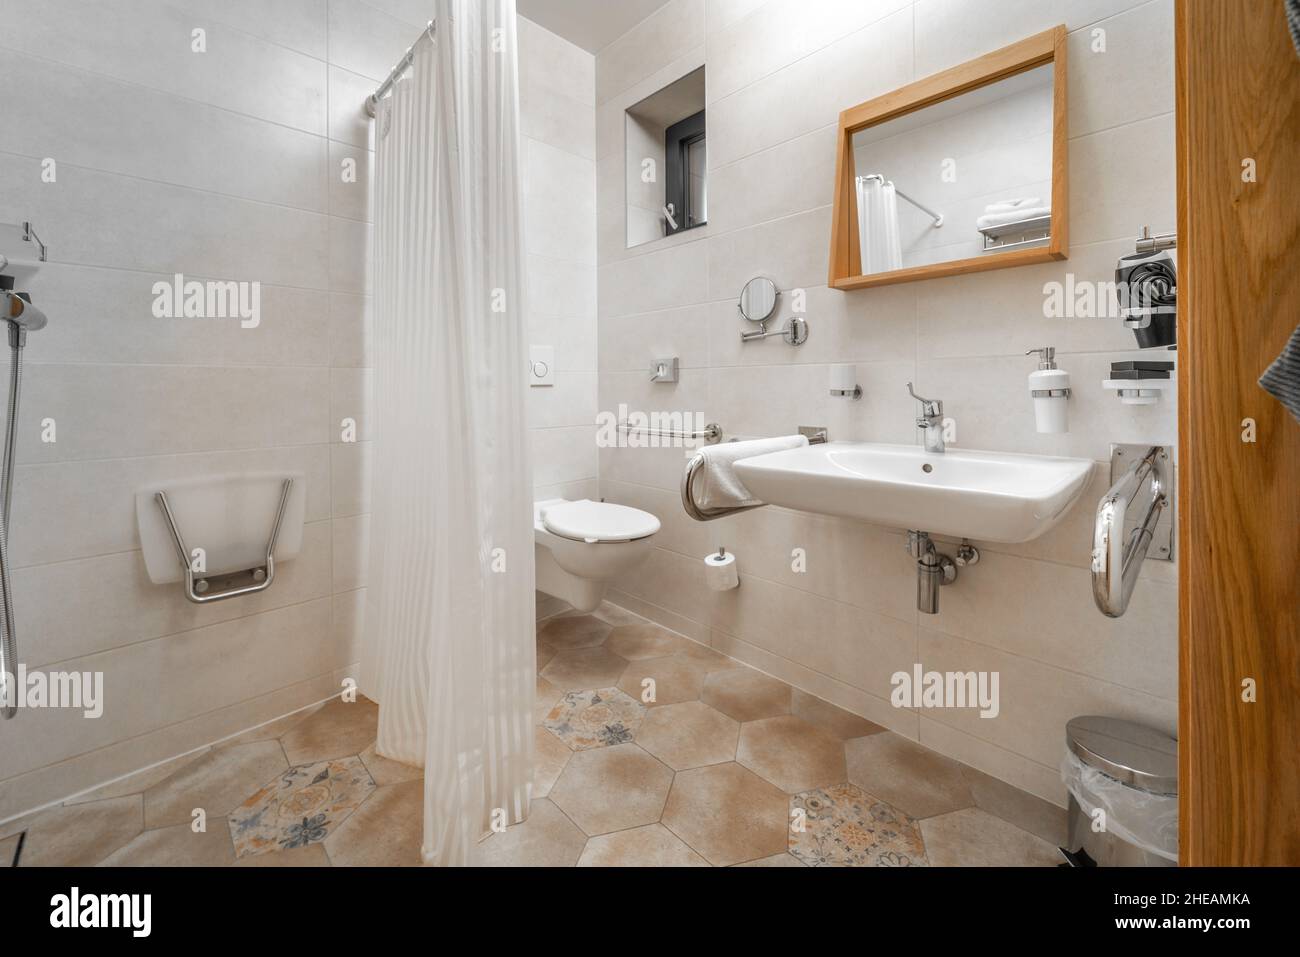 Interior of bathroom for the disabled or elderly people Stock Photo